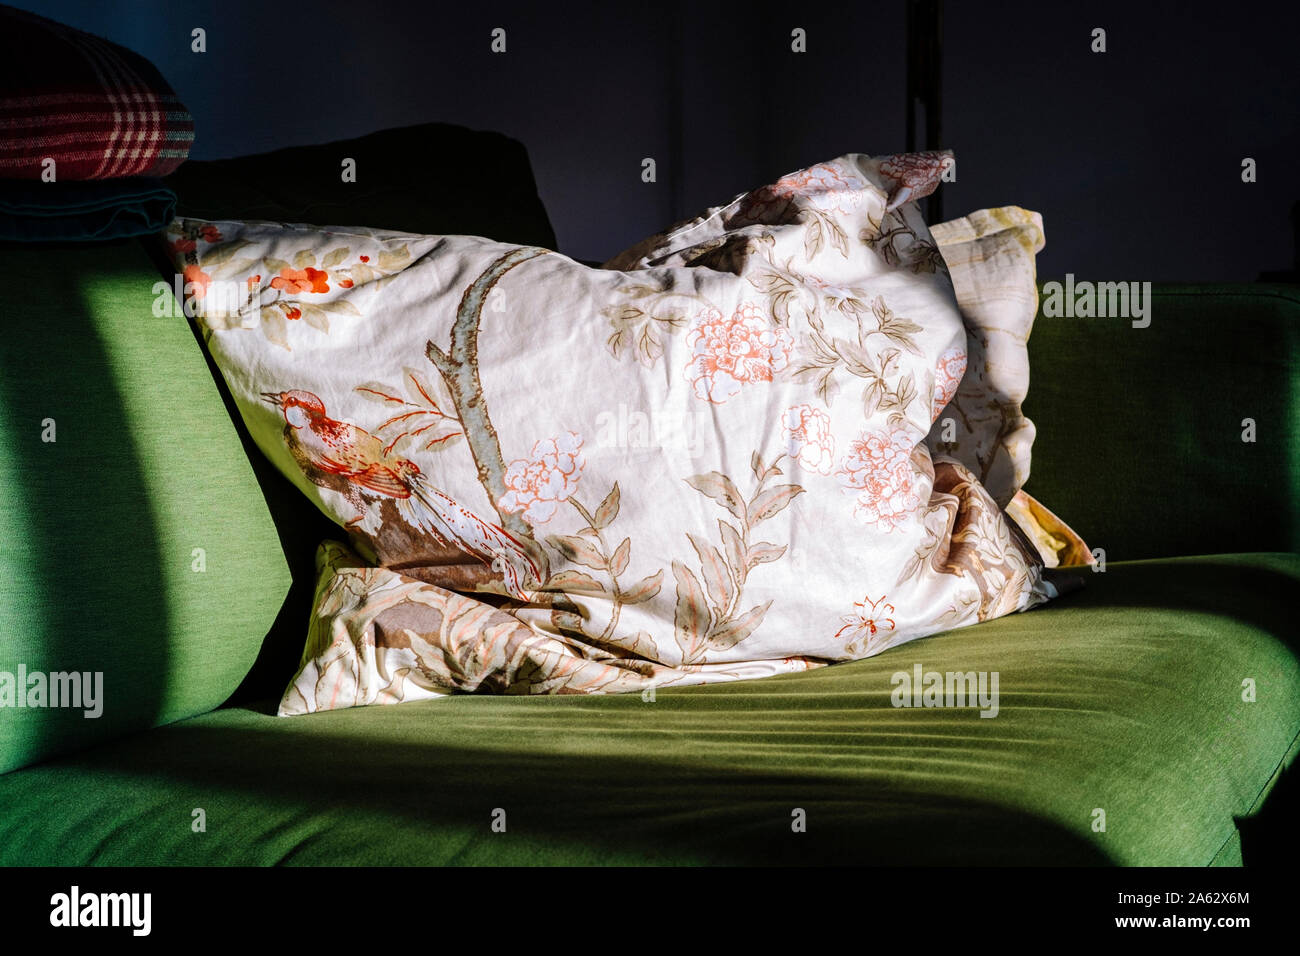 Sofa cushion with floral pattern Stock Photo